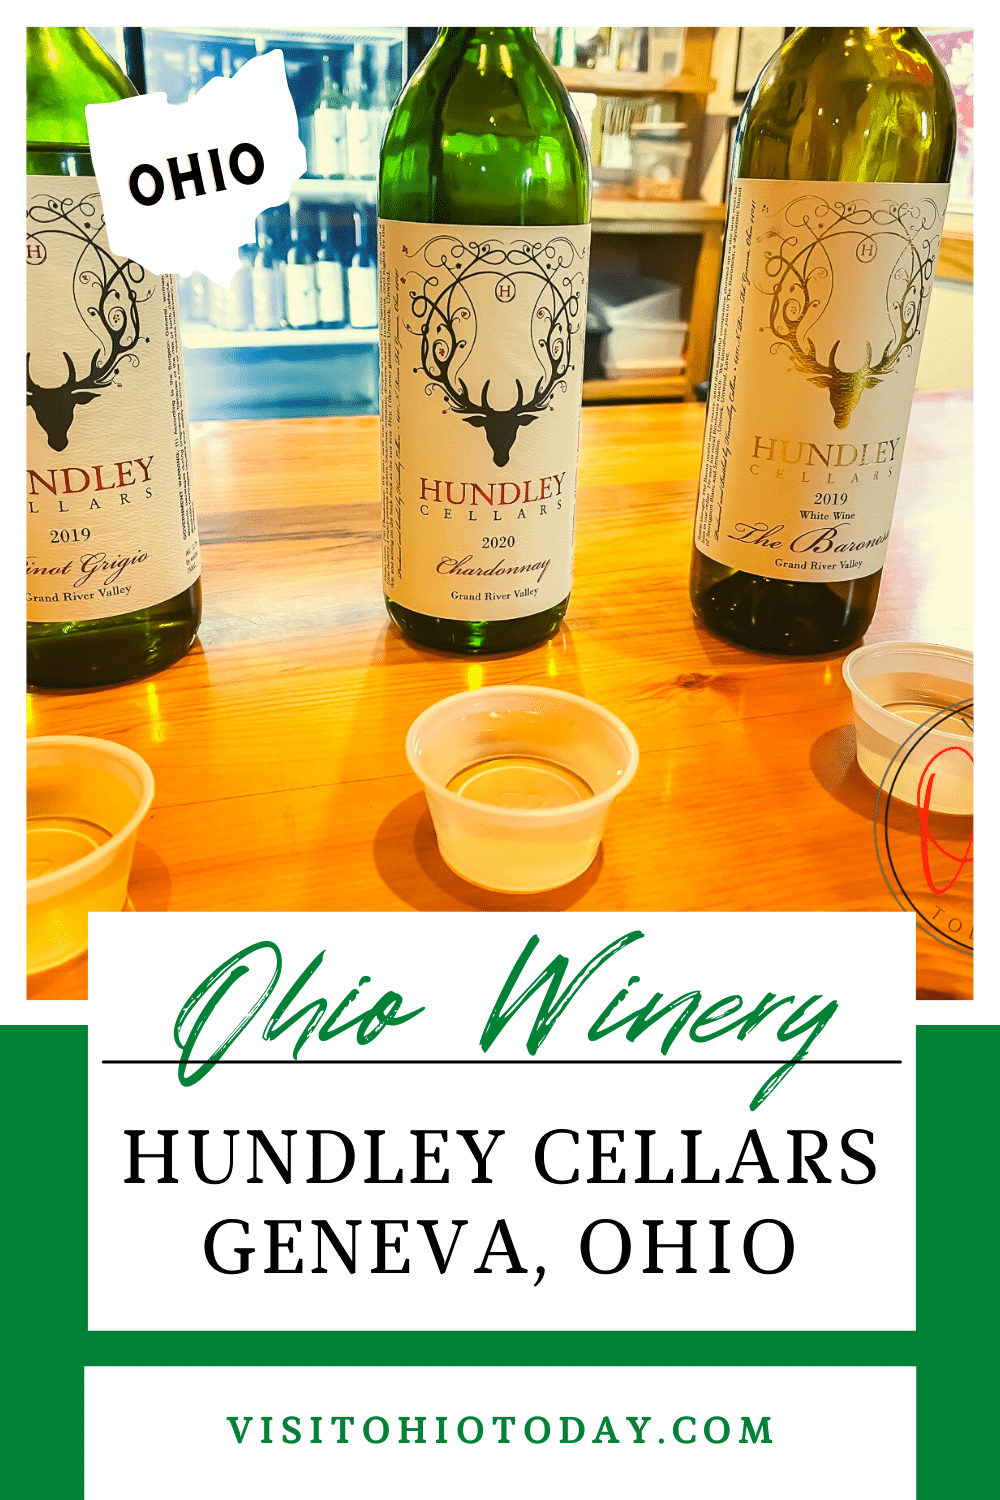 Hundley Cellars is a cozy and welcoming Ohio winery, located in Geneva, Ohio. Hundley Cellars offers food, wine and a place to uncork and unwind.  #ohiowine #ohiowineries #ohiotrip